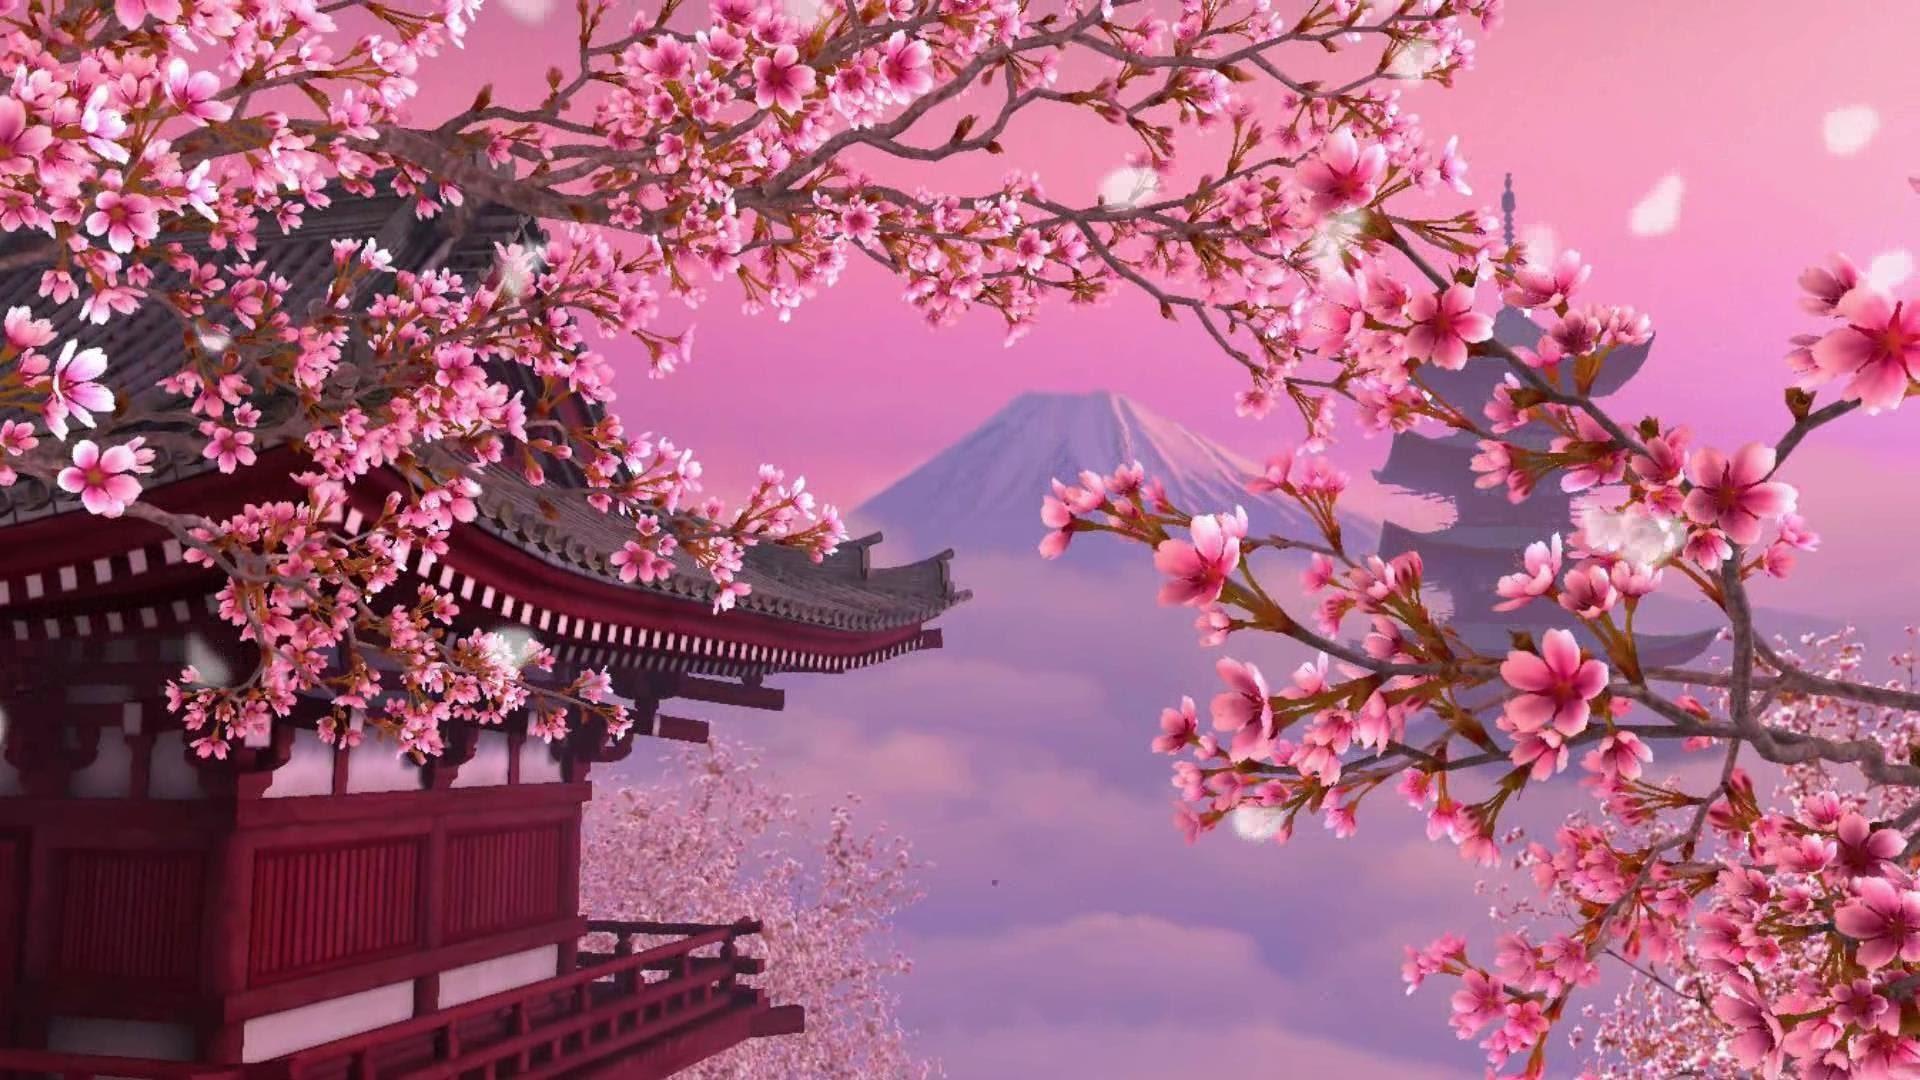 A pink and purple Japanese temple with cherry blossoms in front of it and a mountain in the background. - Cherry blossom